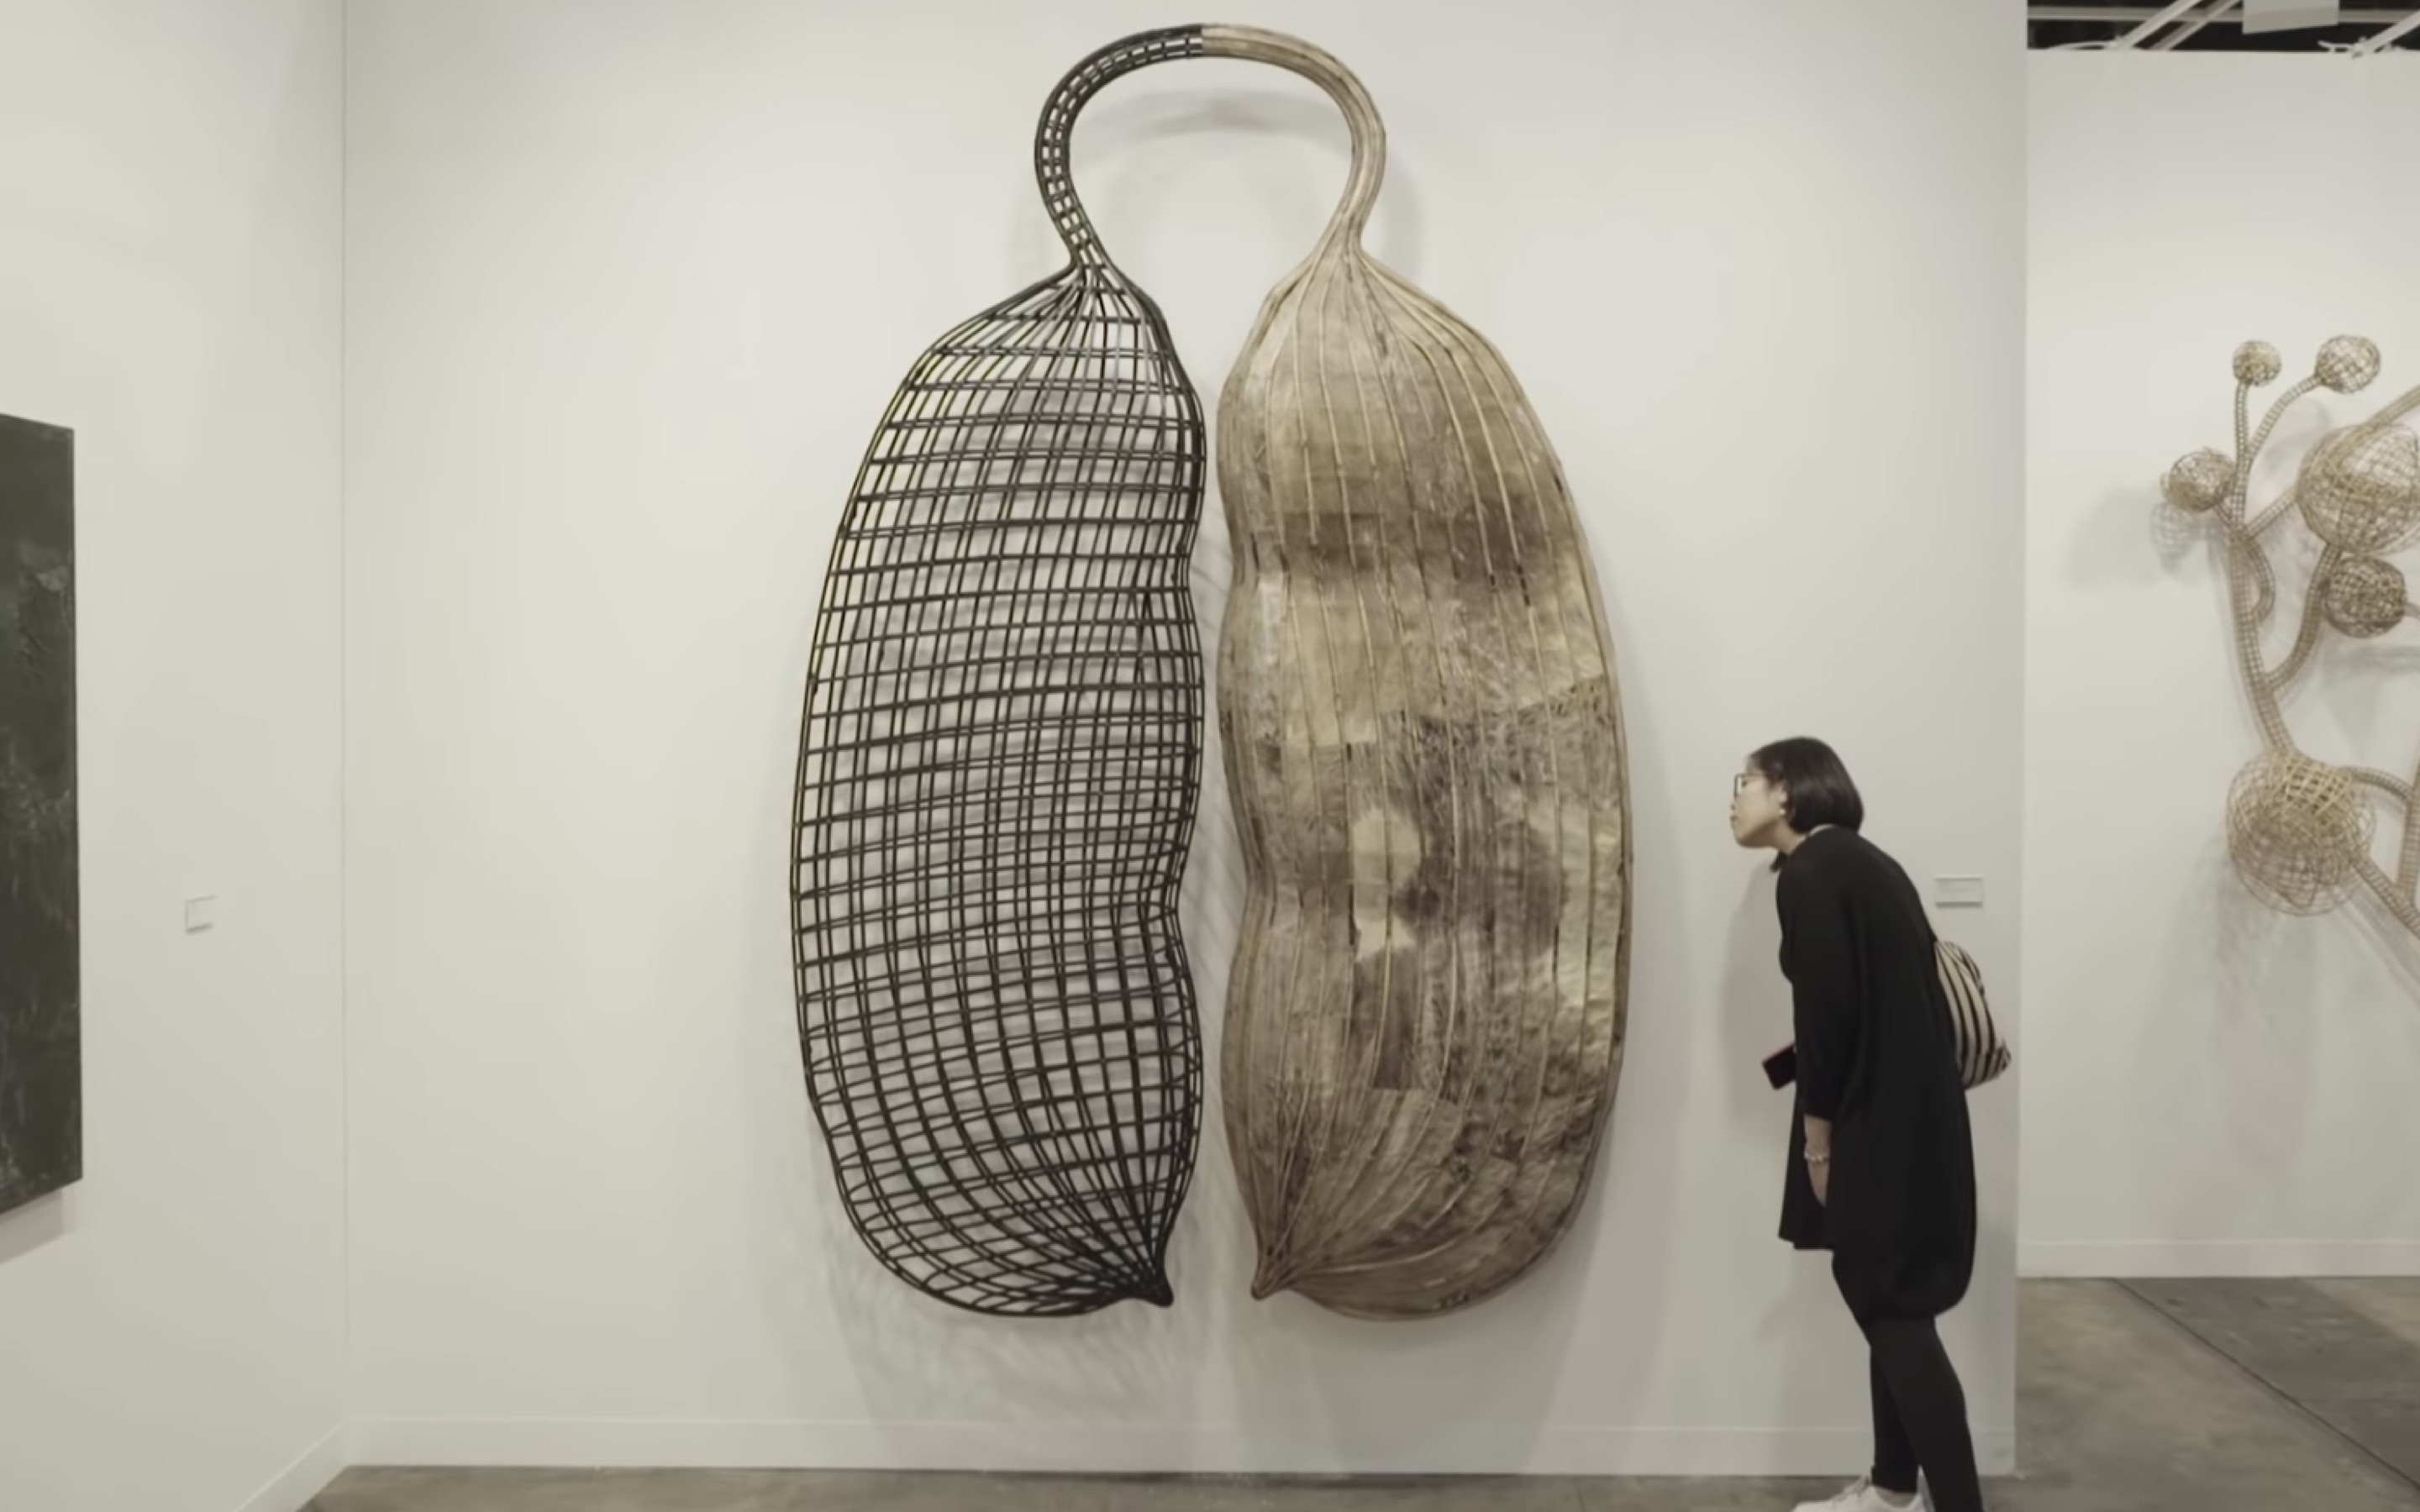 <i></noscript>Untitled</i> by Cambodian artise Sopheap Pich on display at Art Basel 2019. Screengrab via YouTube.